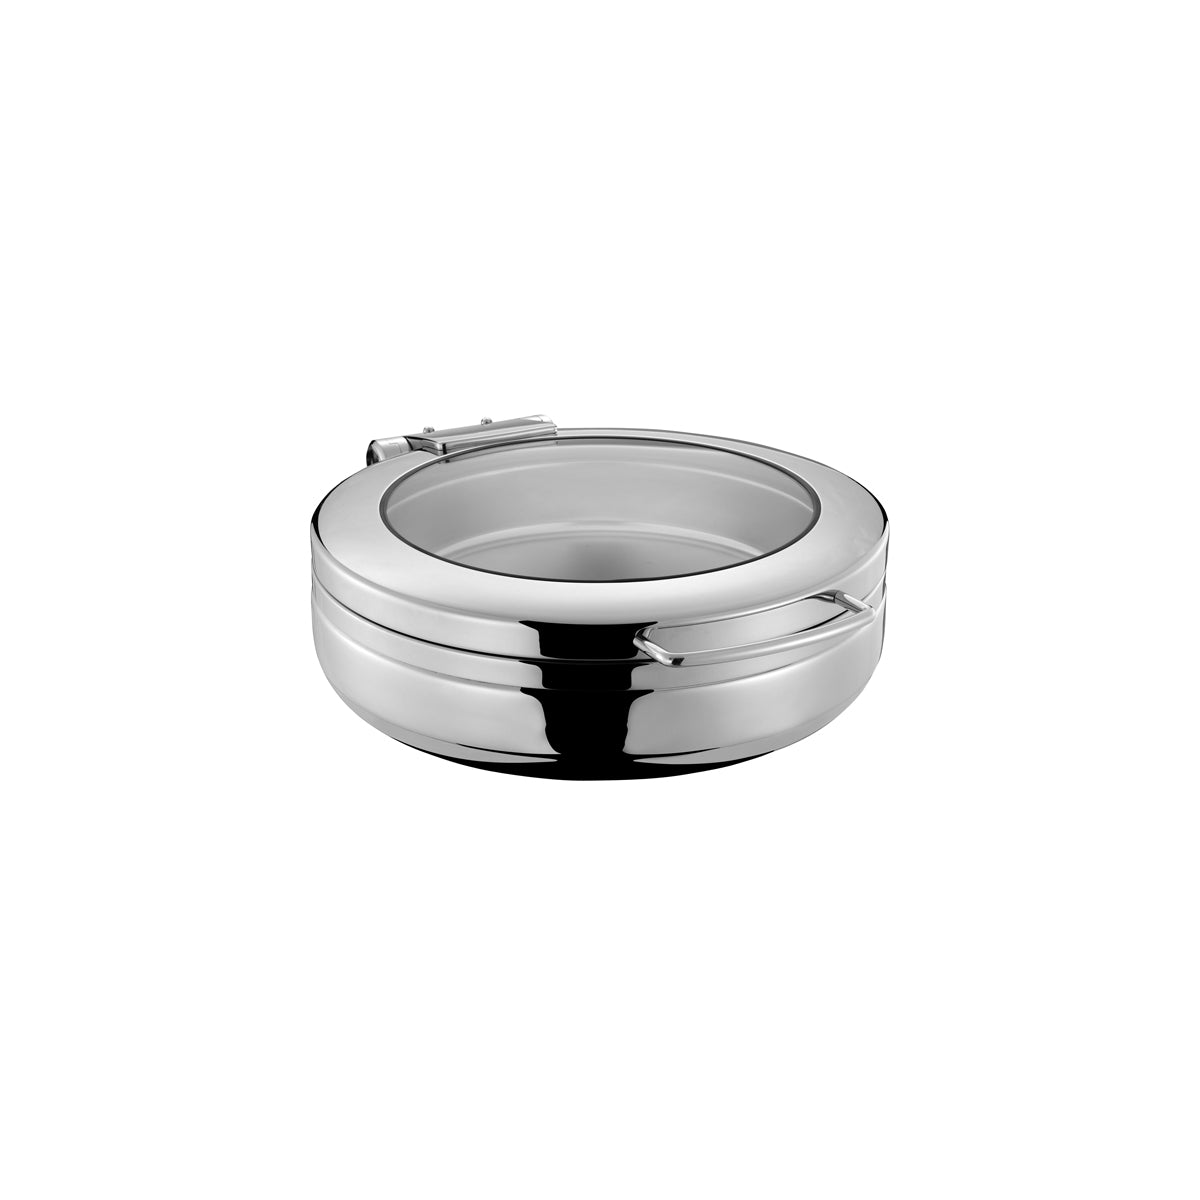 54906 Chef Inox Induction Chafer Round 18/8 Stainless Steel Large with Glass Lid Tomkin Australia Hospitality Supplies